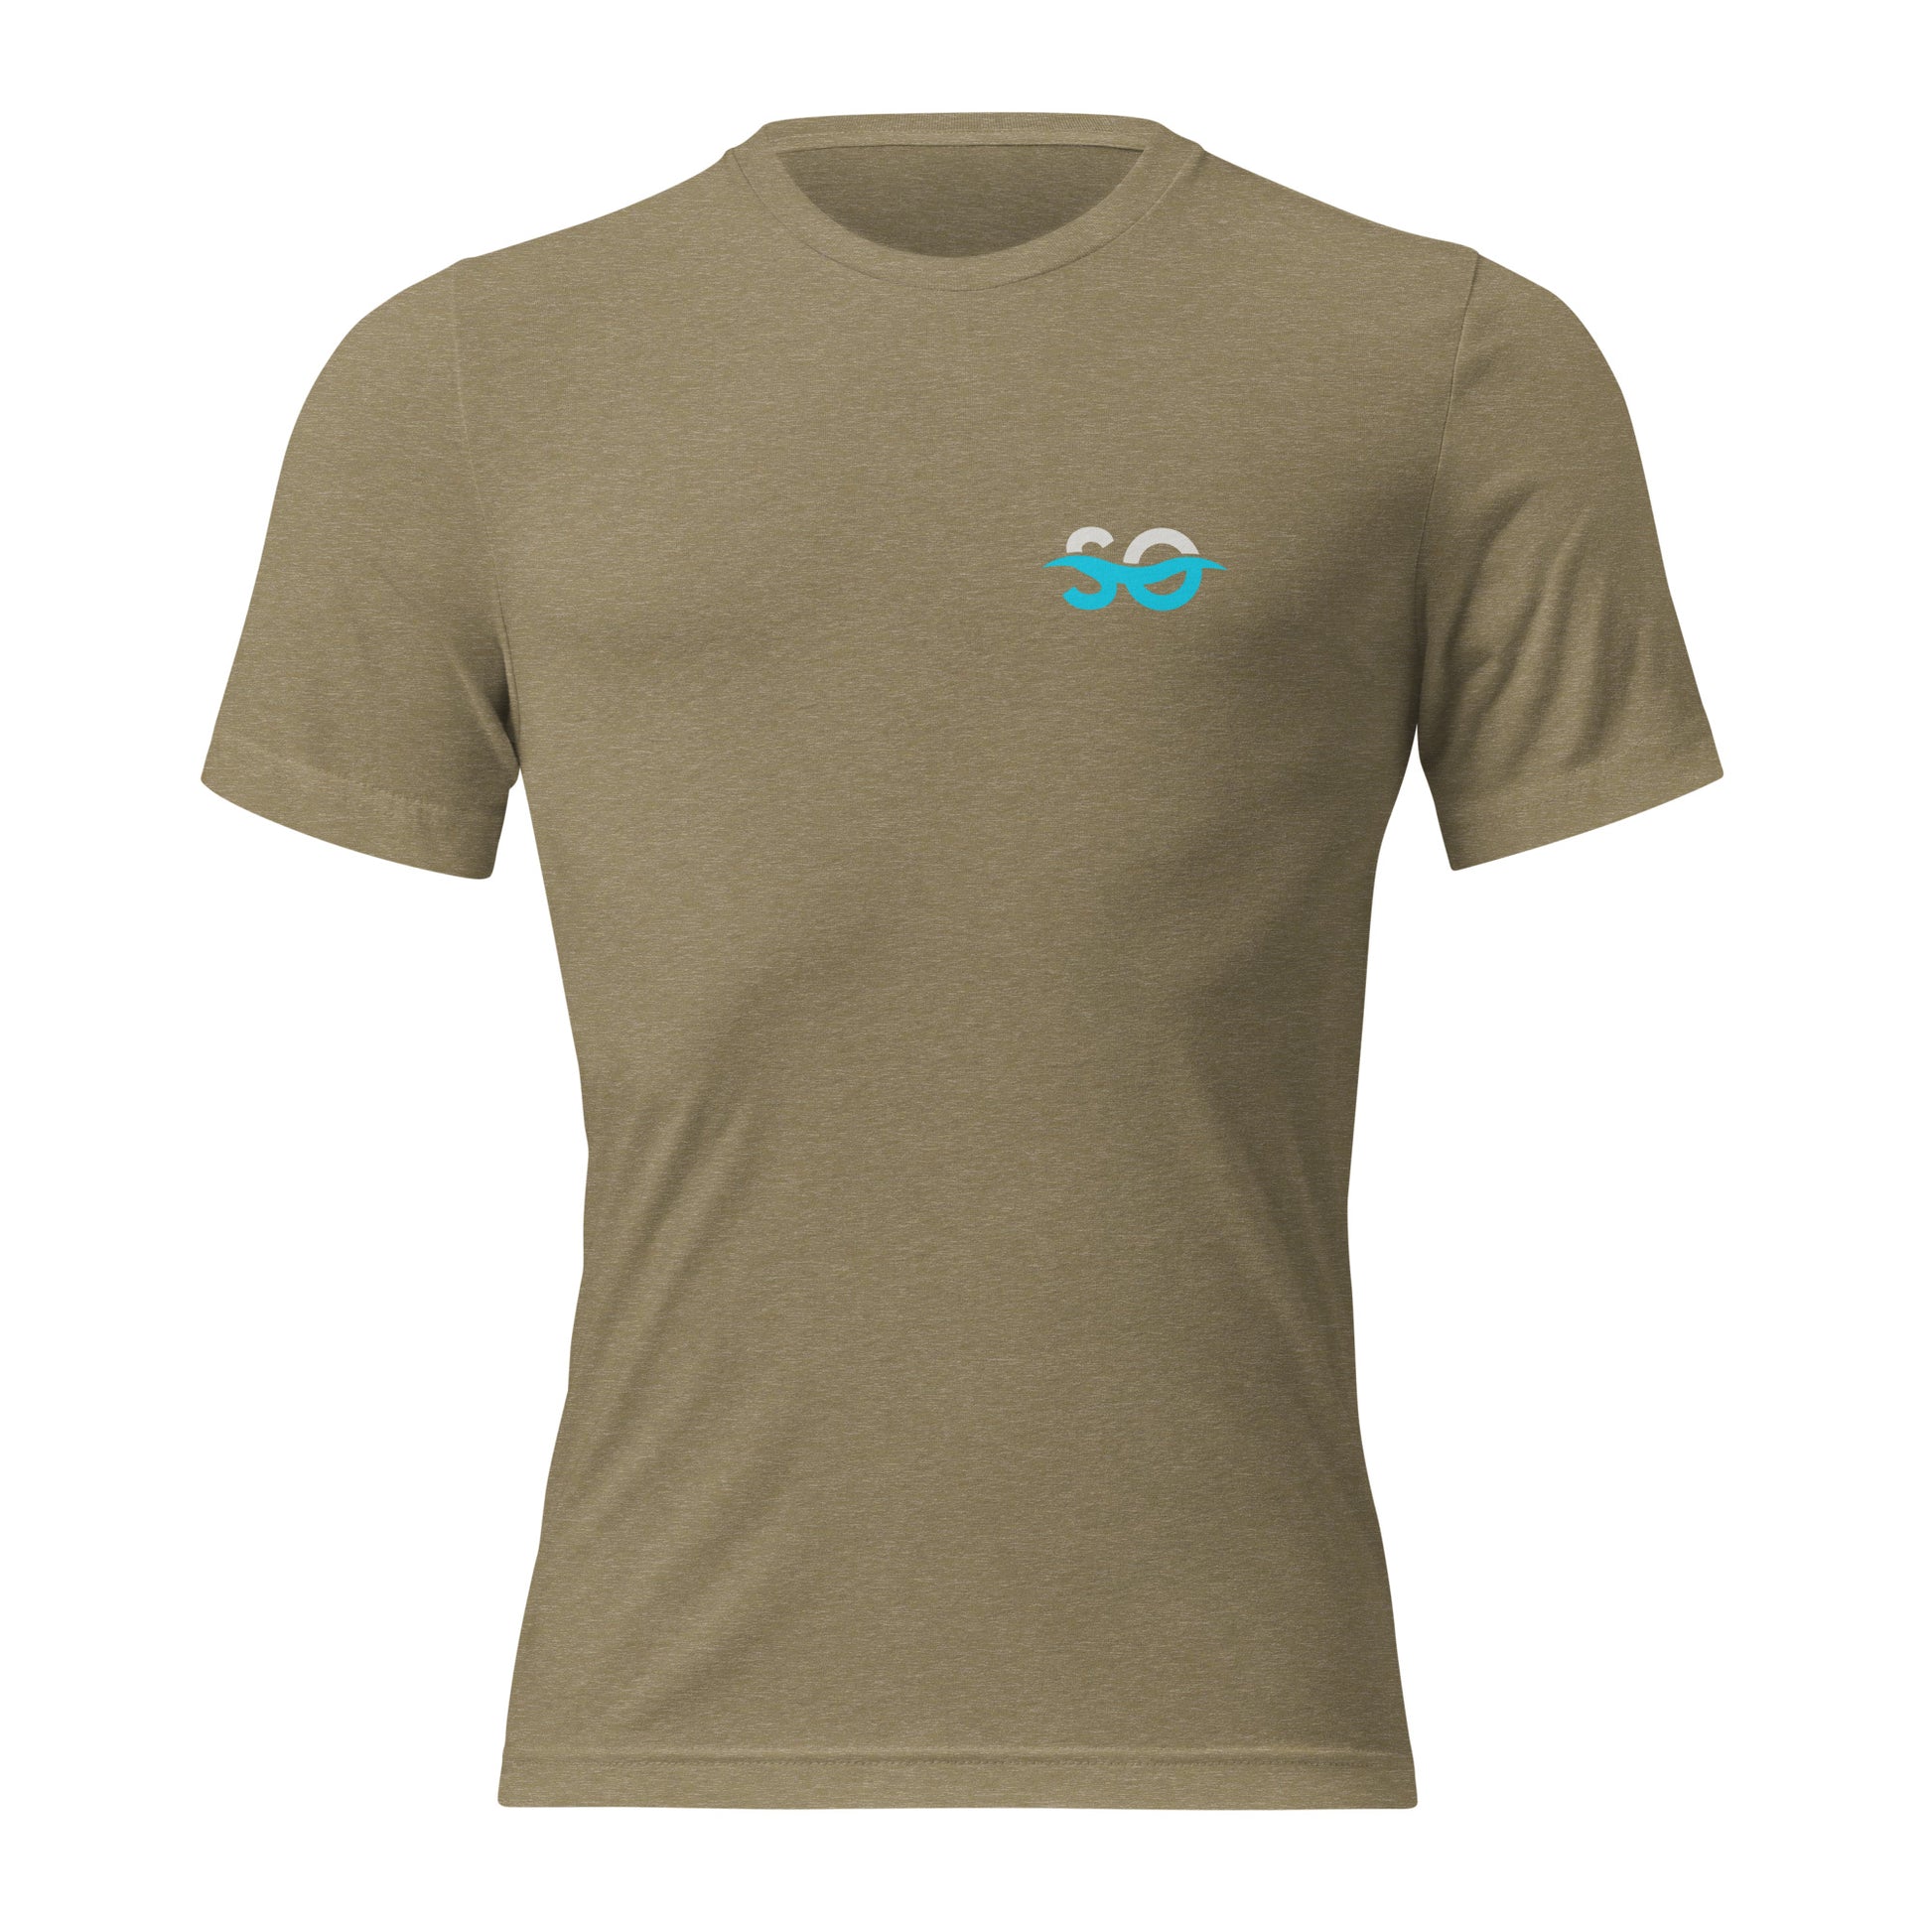 a t - shirt with a blue logo on the chest